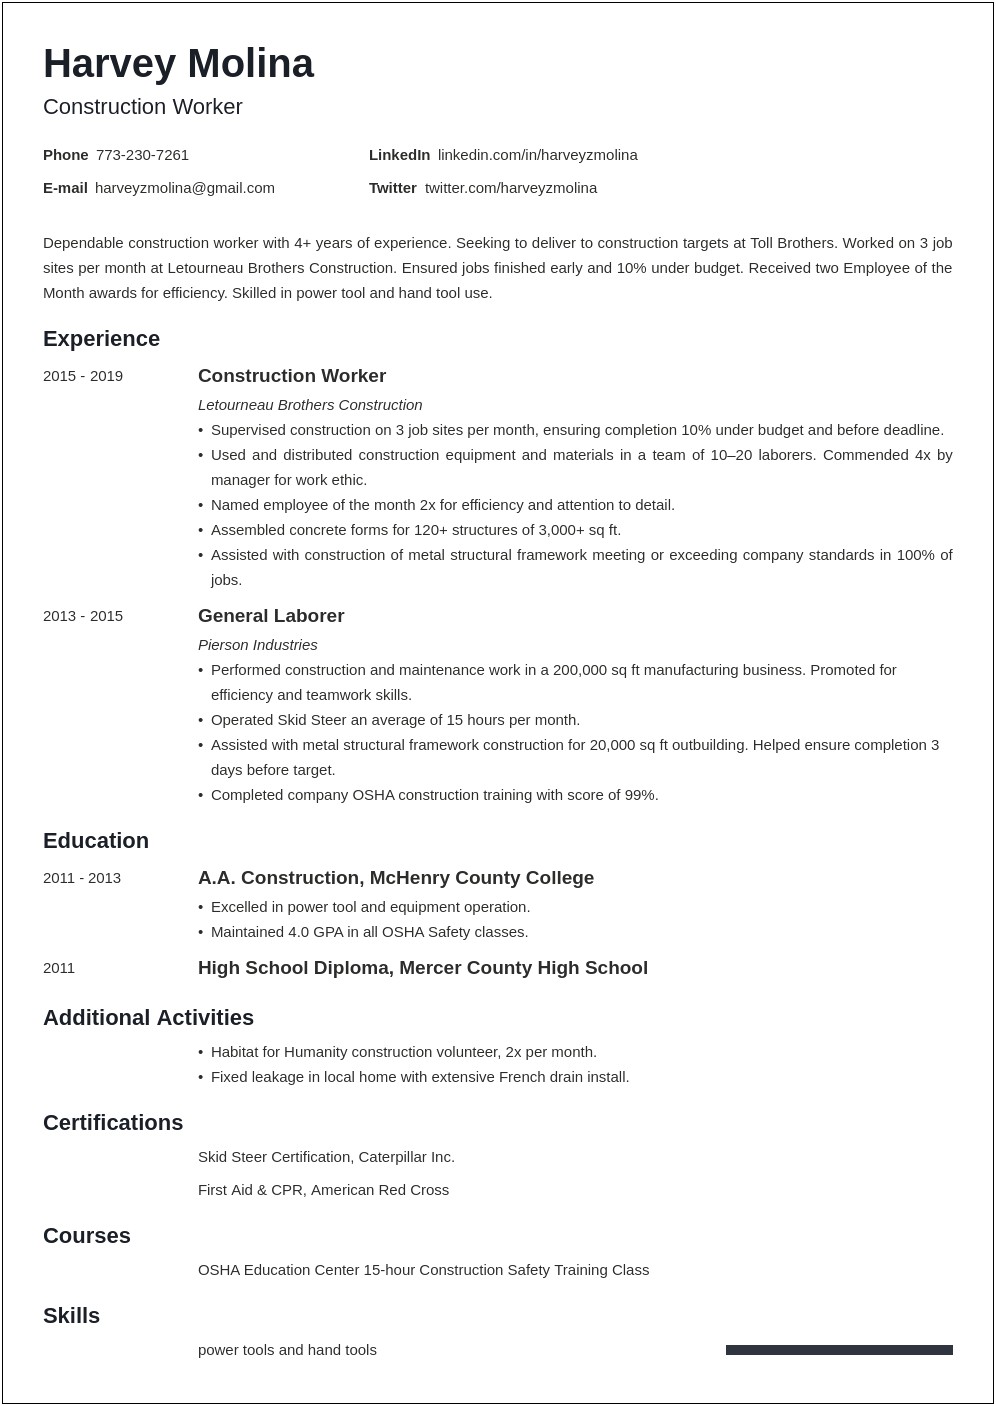 Sample Construction Worker Resume Objective